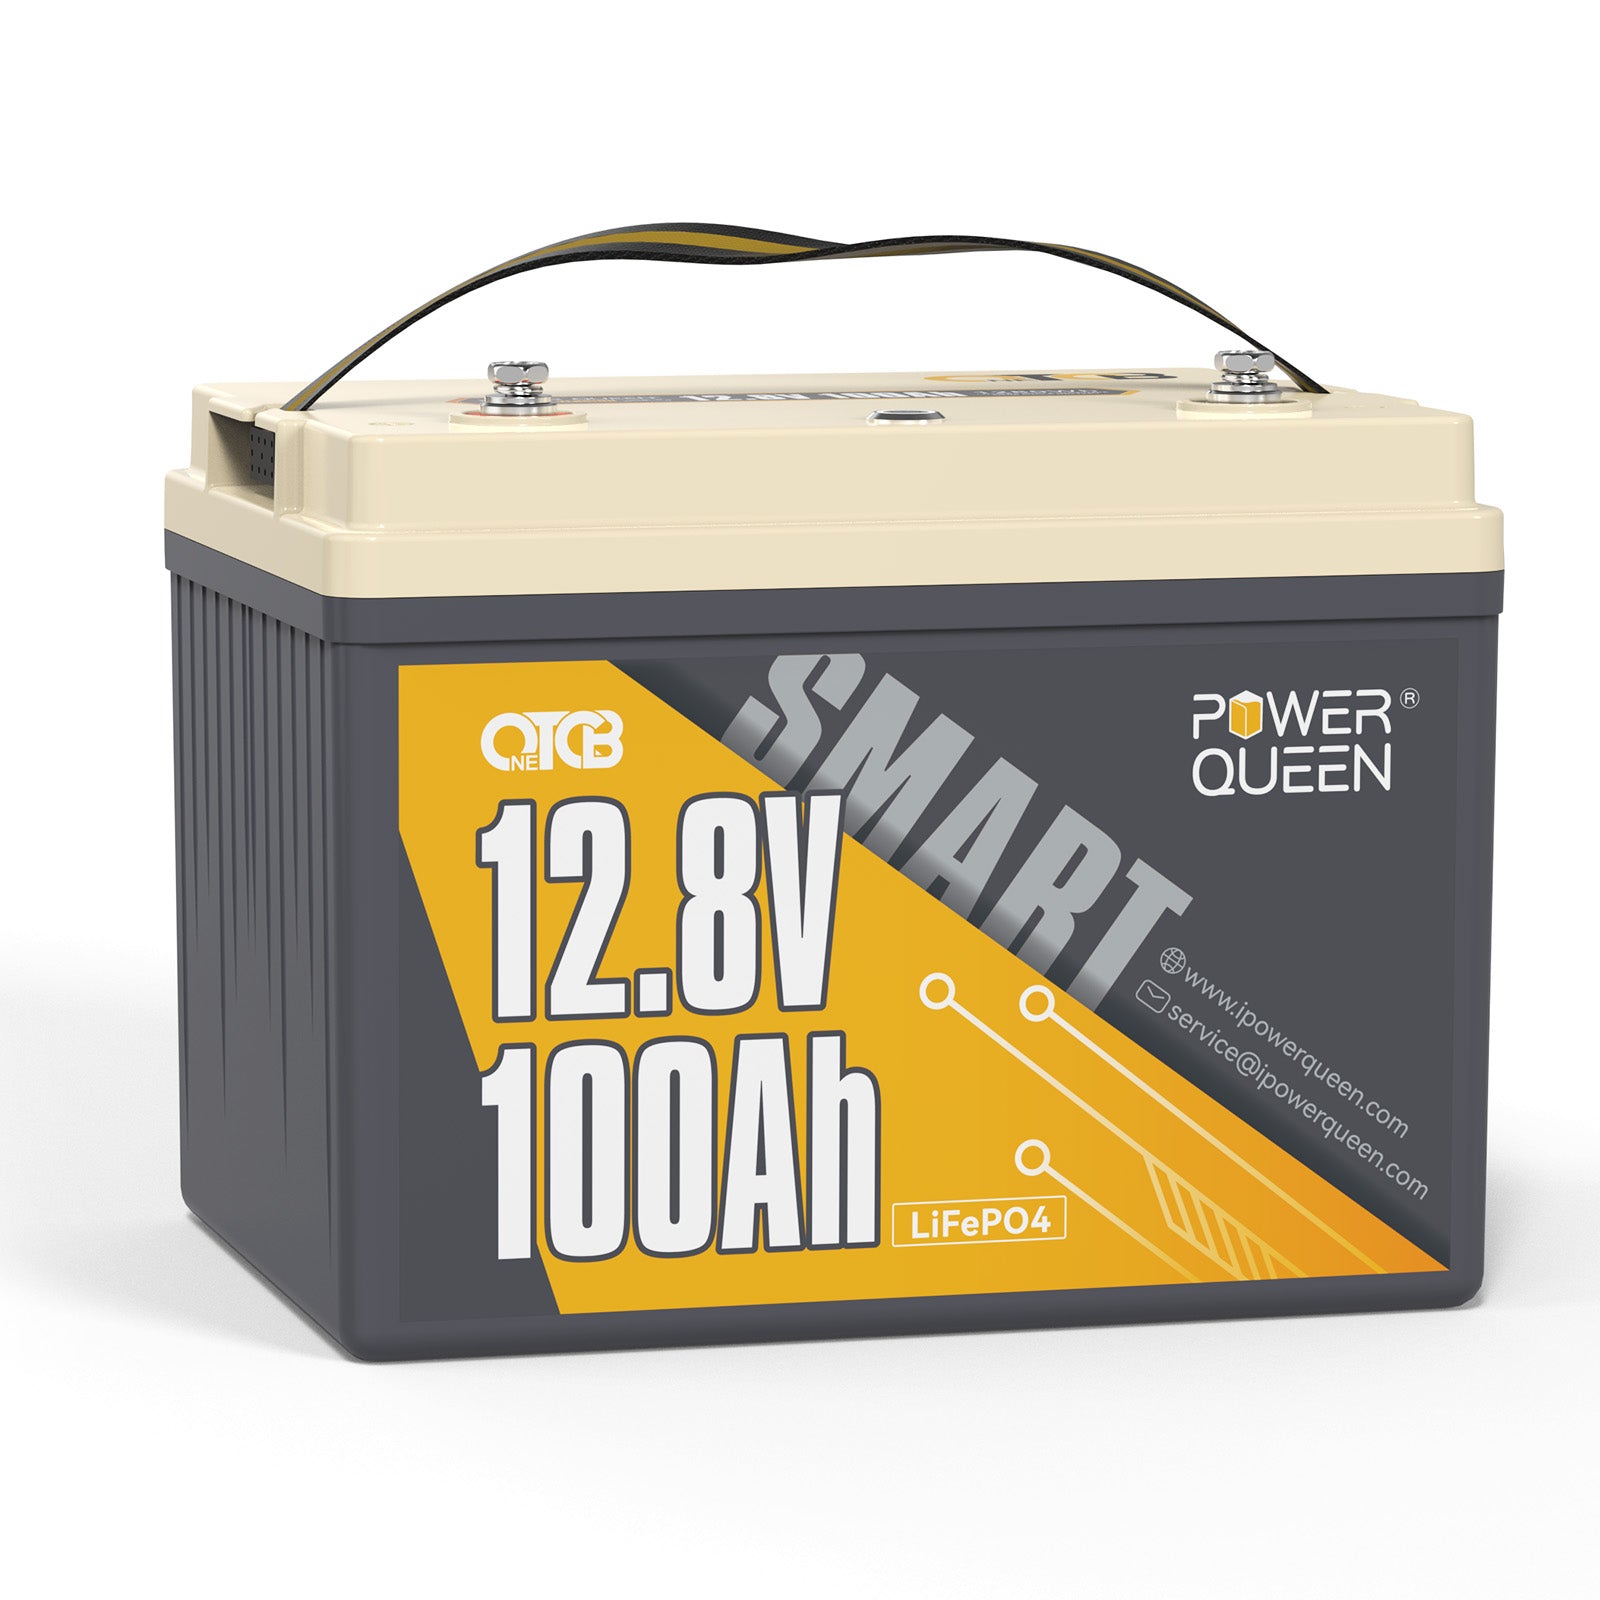 Power Queen 12V 100Ah low temp OTCB LiFePO4 battery with built-in 100A BMS